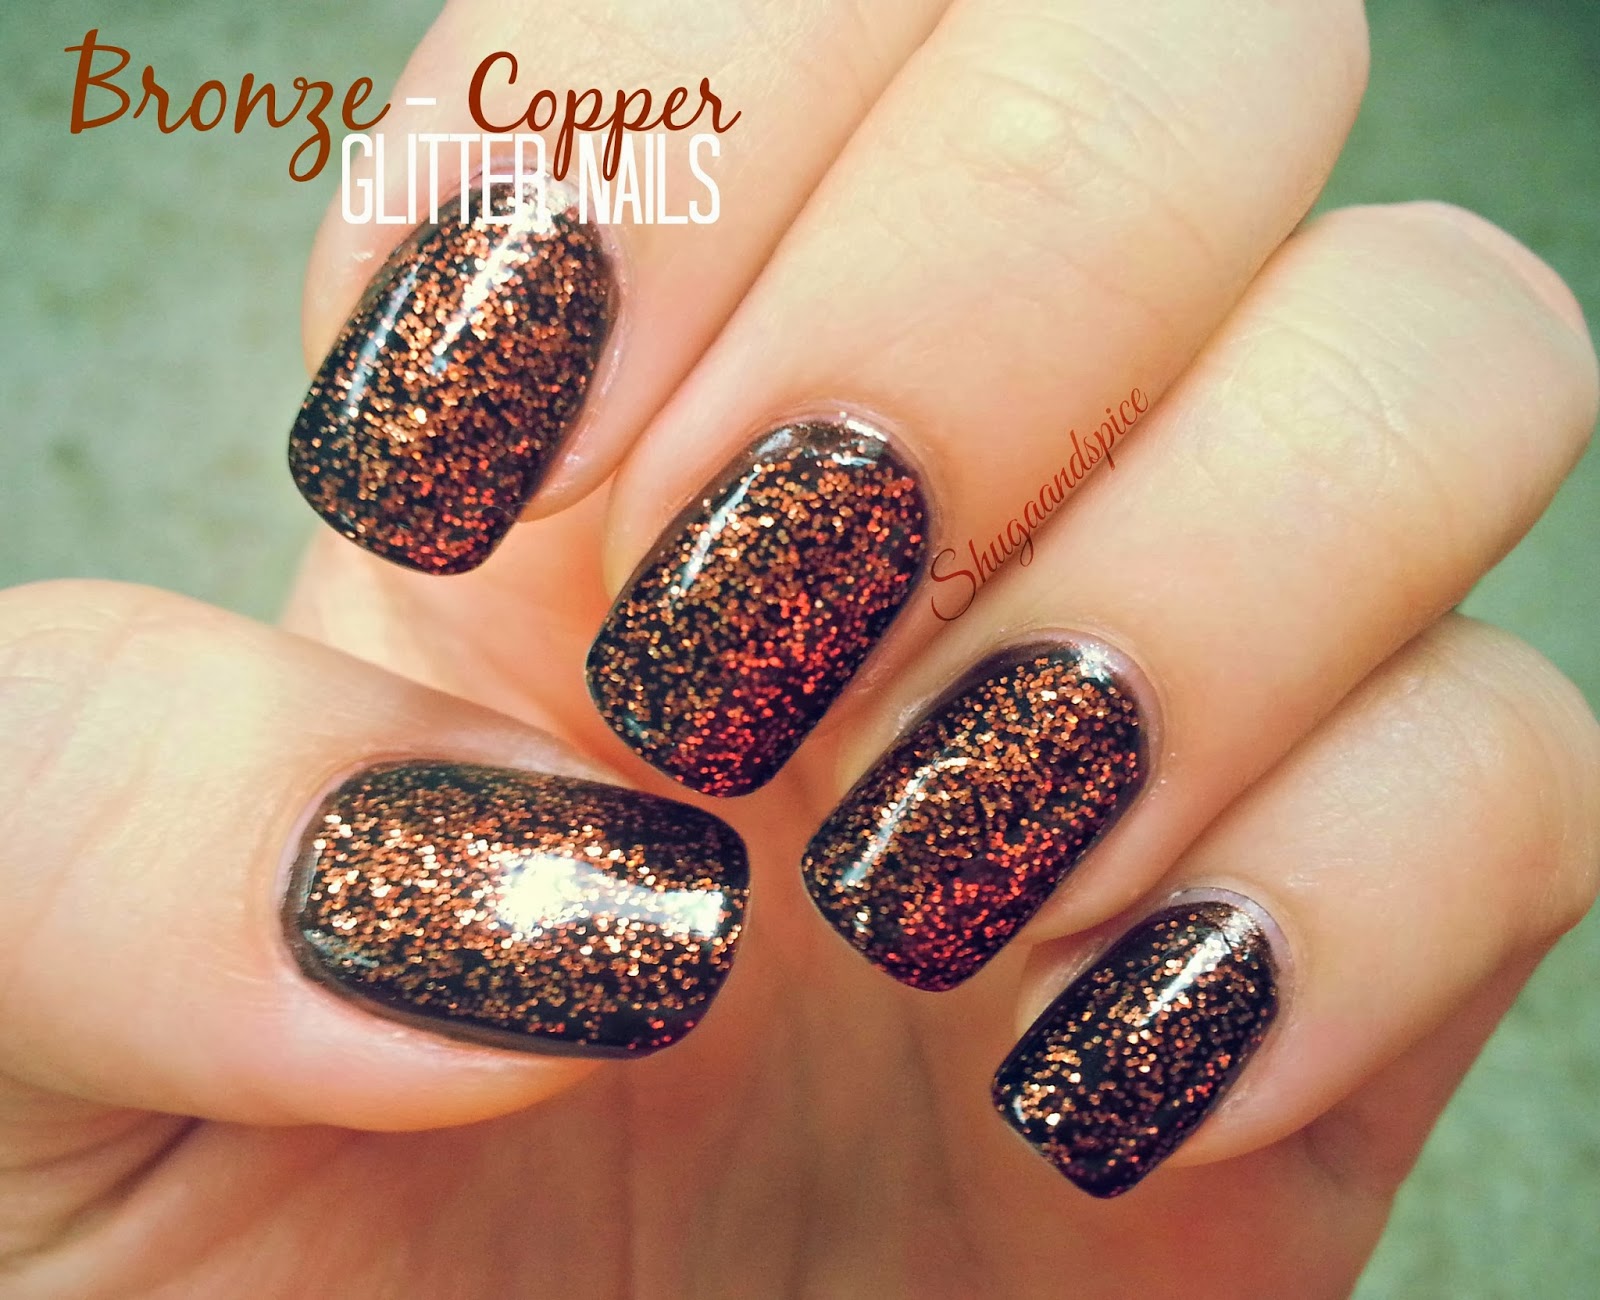 2. Brown and Bronze Glitter Nails - wide 7